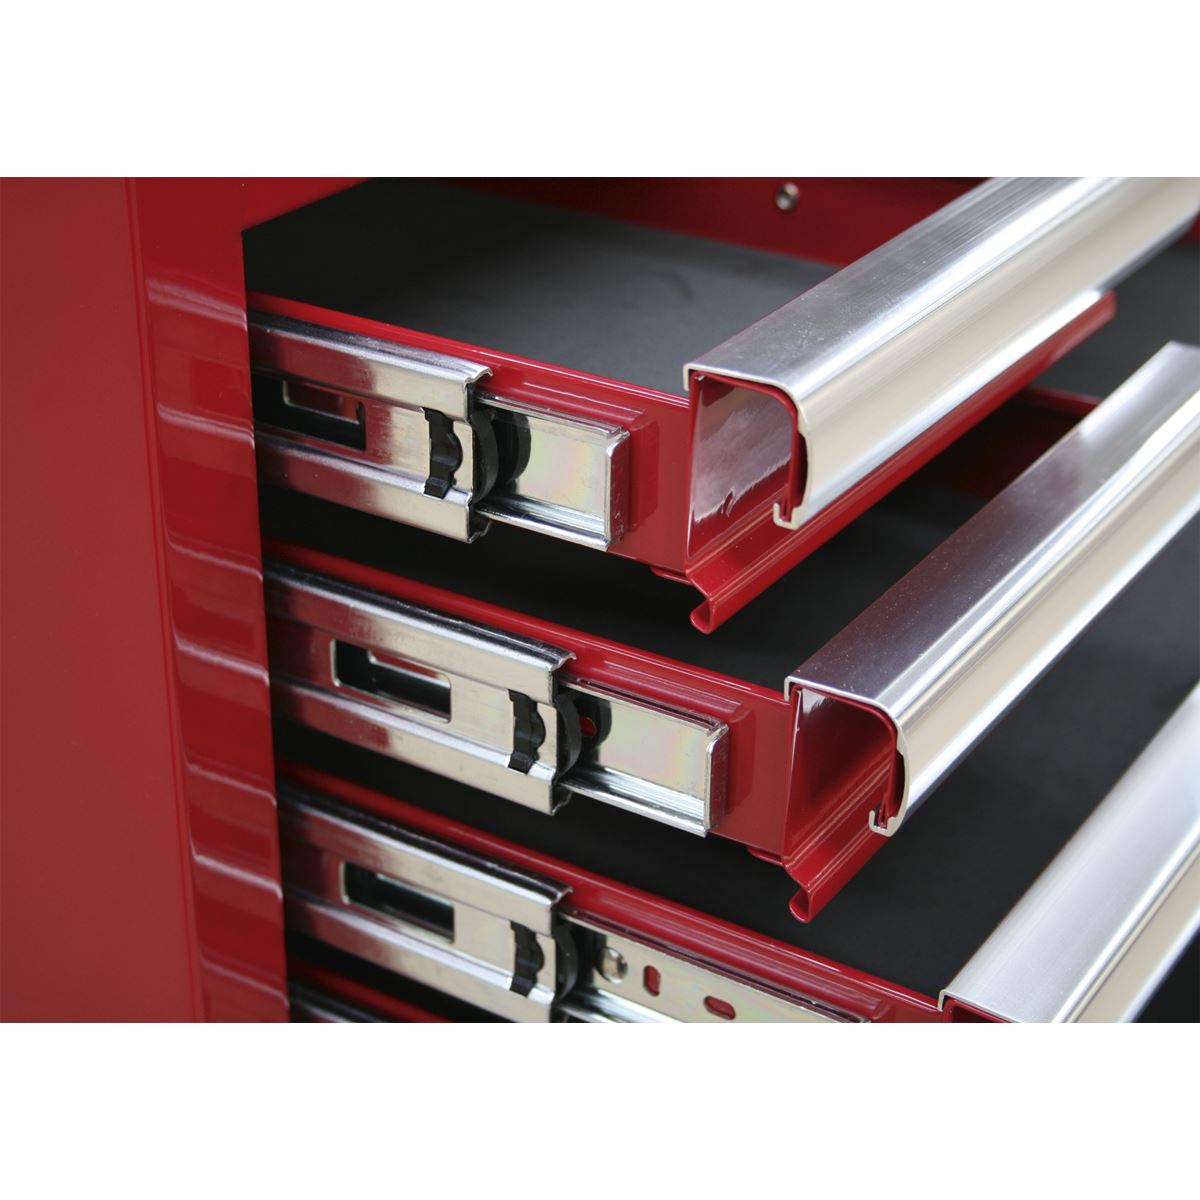 Sealey Superline Pro Hang-On Chest 8 Drawer with Ball-Bearing Slides - Red